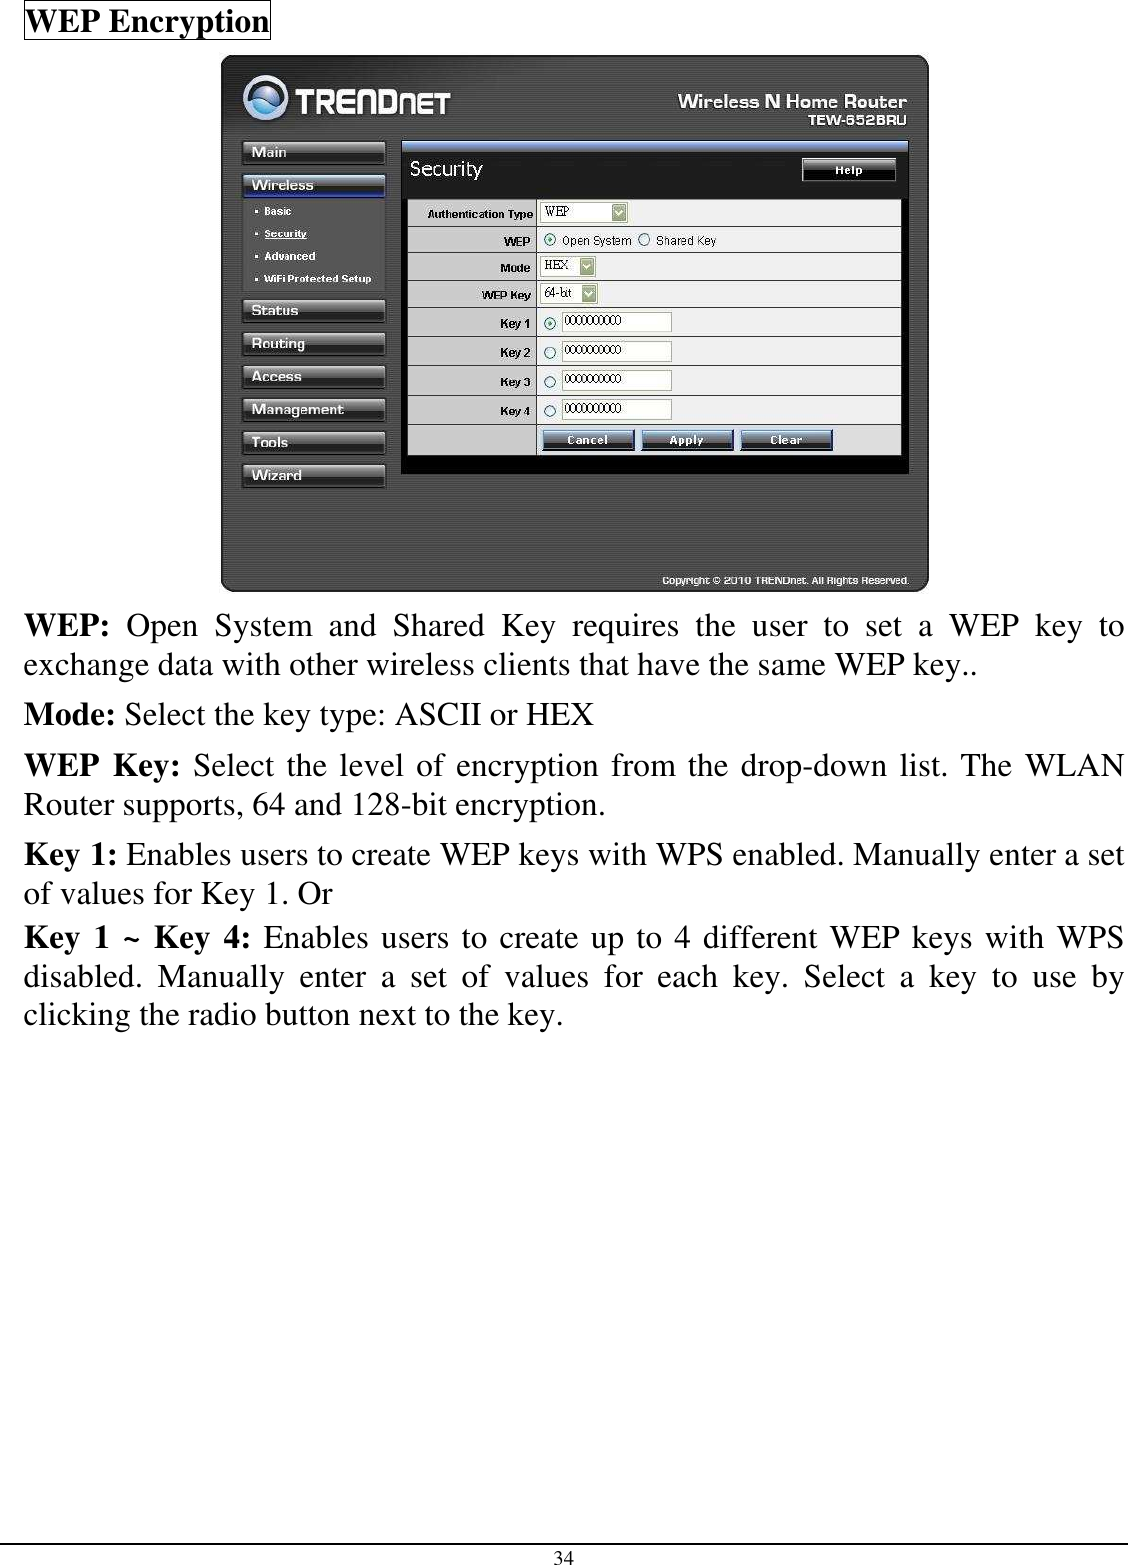 34 WEP Encryption  WEP:  Open  System  and  Shared  Key  requires  the  user  to  set  a  WEP  key  to exchange data with other wireless clients that have the same WEP key.. Mode: Select the key type: ASCII or HEX WEP Key: Select the level of encryption from the drop-down list. The WLAN Router supports, 64 and 128-bit encryption. Key 1: Enables users to create WEP keys with WPS enabled. Manually enter a set of values for Key 1. Or  Key 1 ~ Key 4: Enables users to create up to 4 different WEP keys with WPS disabled.  Manually  enter  a  set  of  values  for  each  key.  Select  a  key  to  use  by clicking the radio button next to the key.           